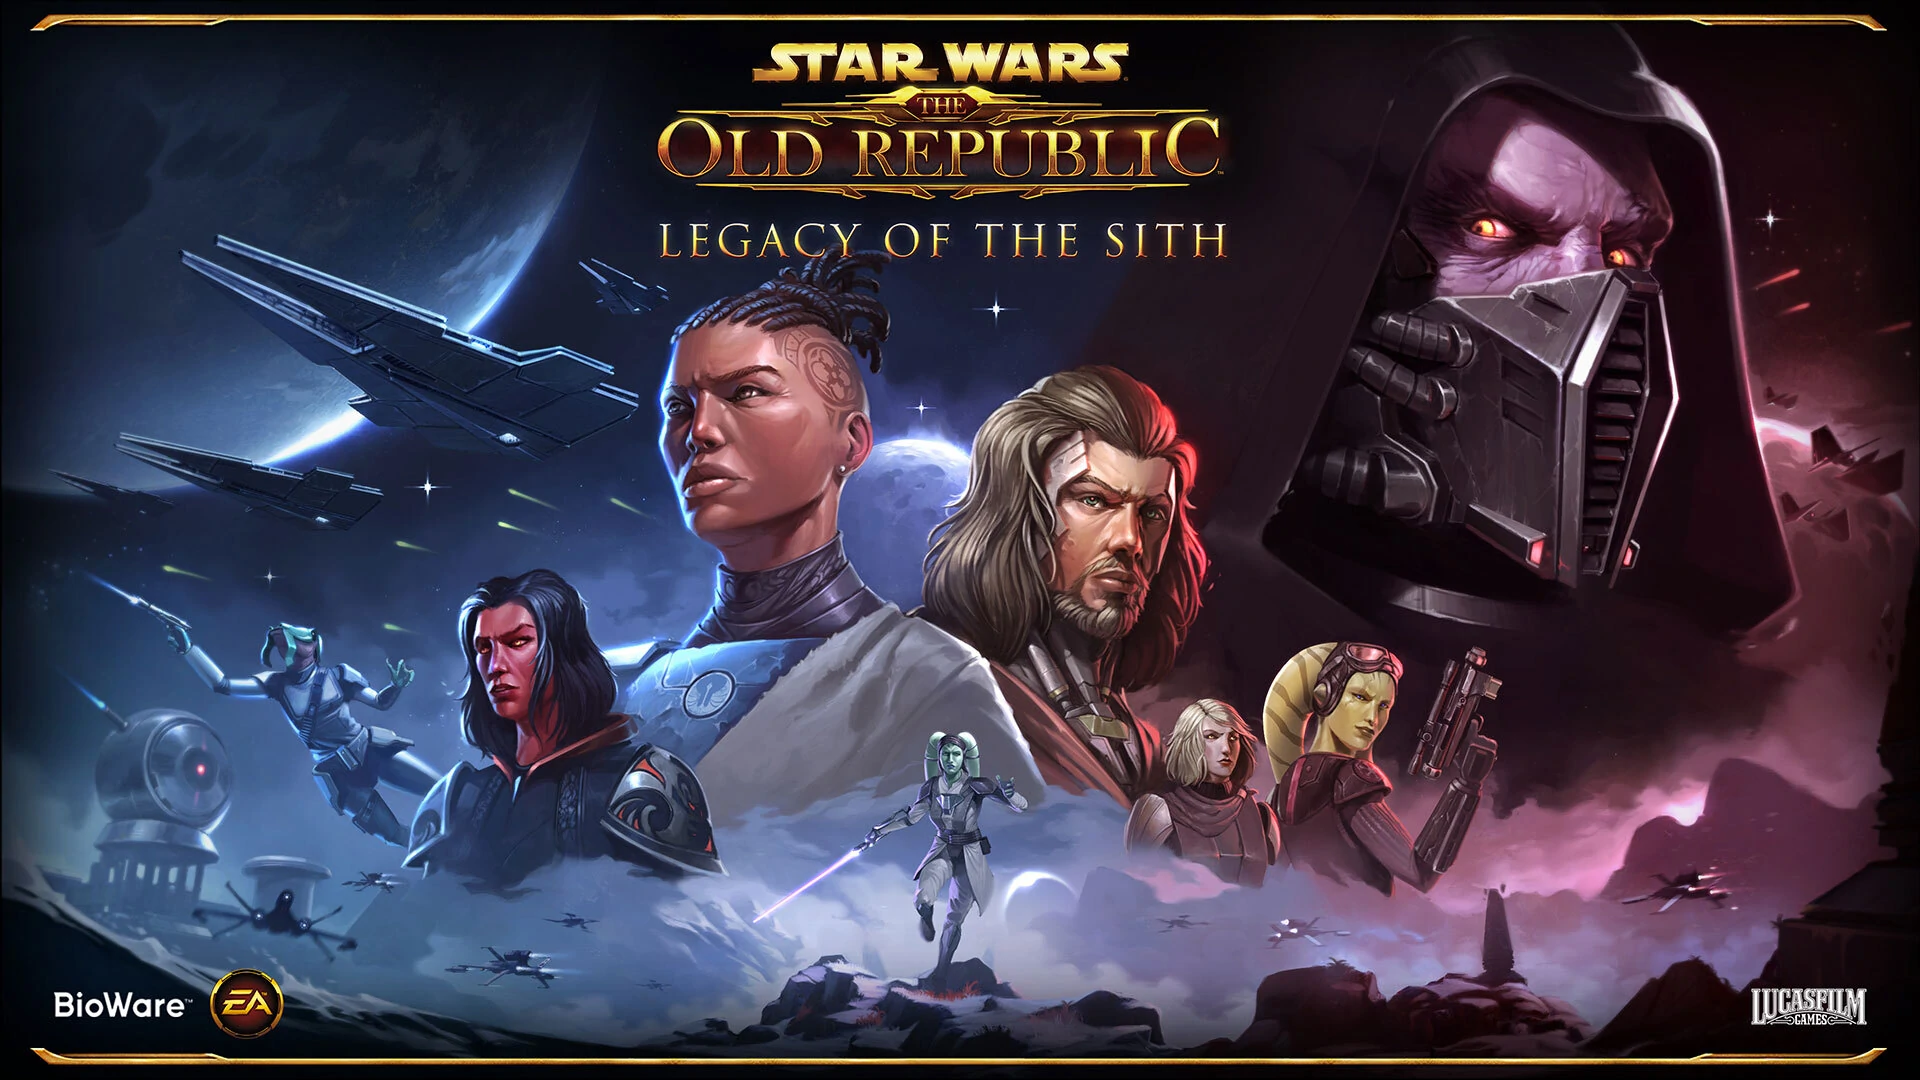 SWTOR Gets Ready for Legacy of the Sith with New Story Teaser